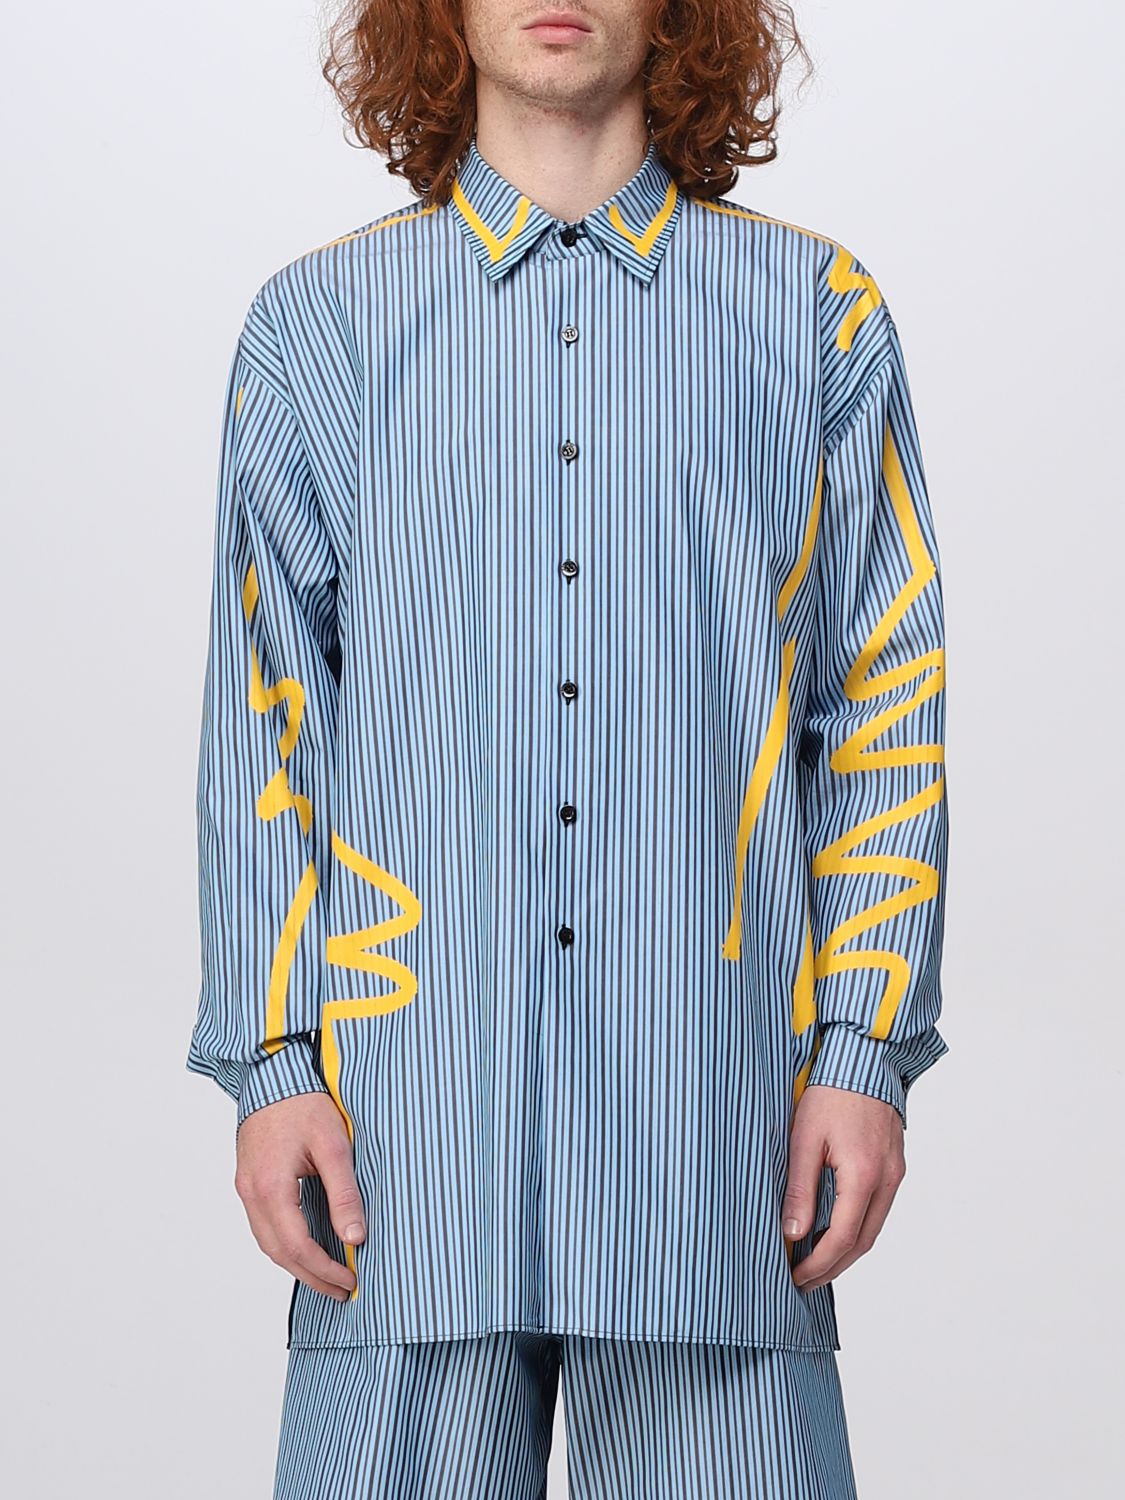 MOSCHINO COUTURE: shirt for man - Gnawed Blue | Moschino Couture shirt ...